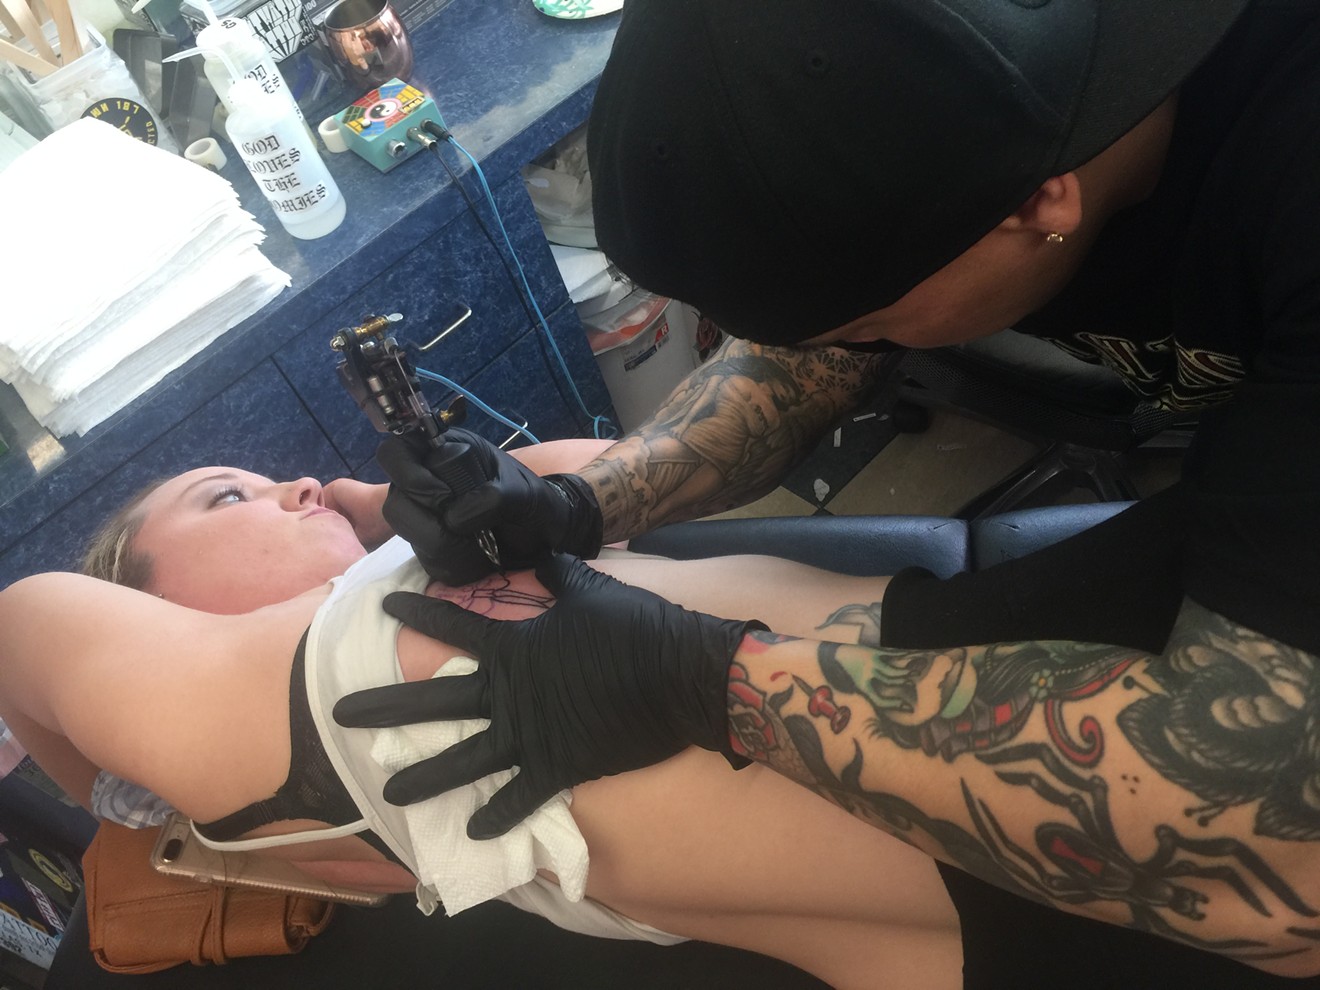 Heather Treadway of Denton gets her fifth Friday the 13th tattoo from artist Bryan Black at Elm Street Tattoo in Deep Ellum.